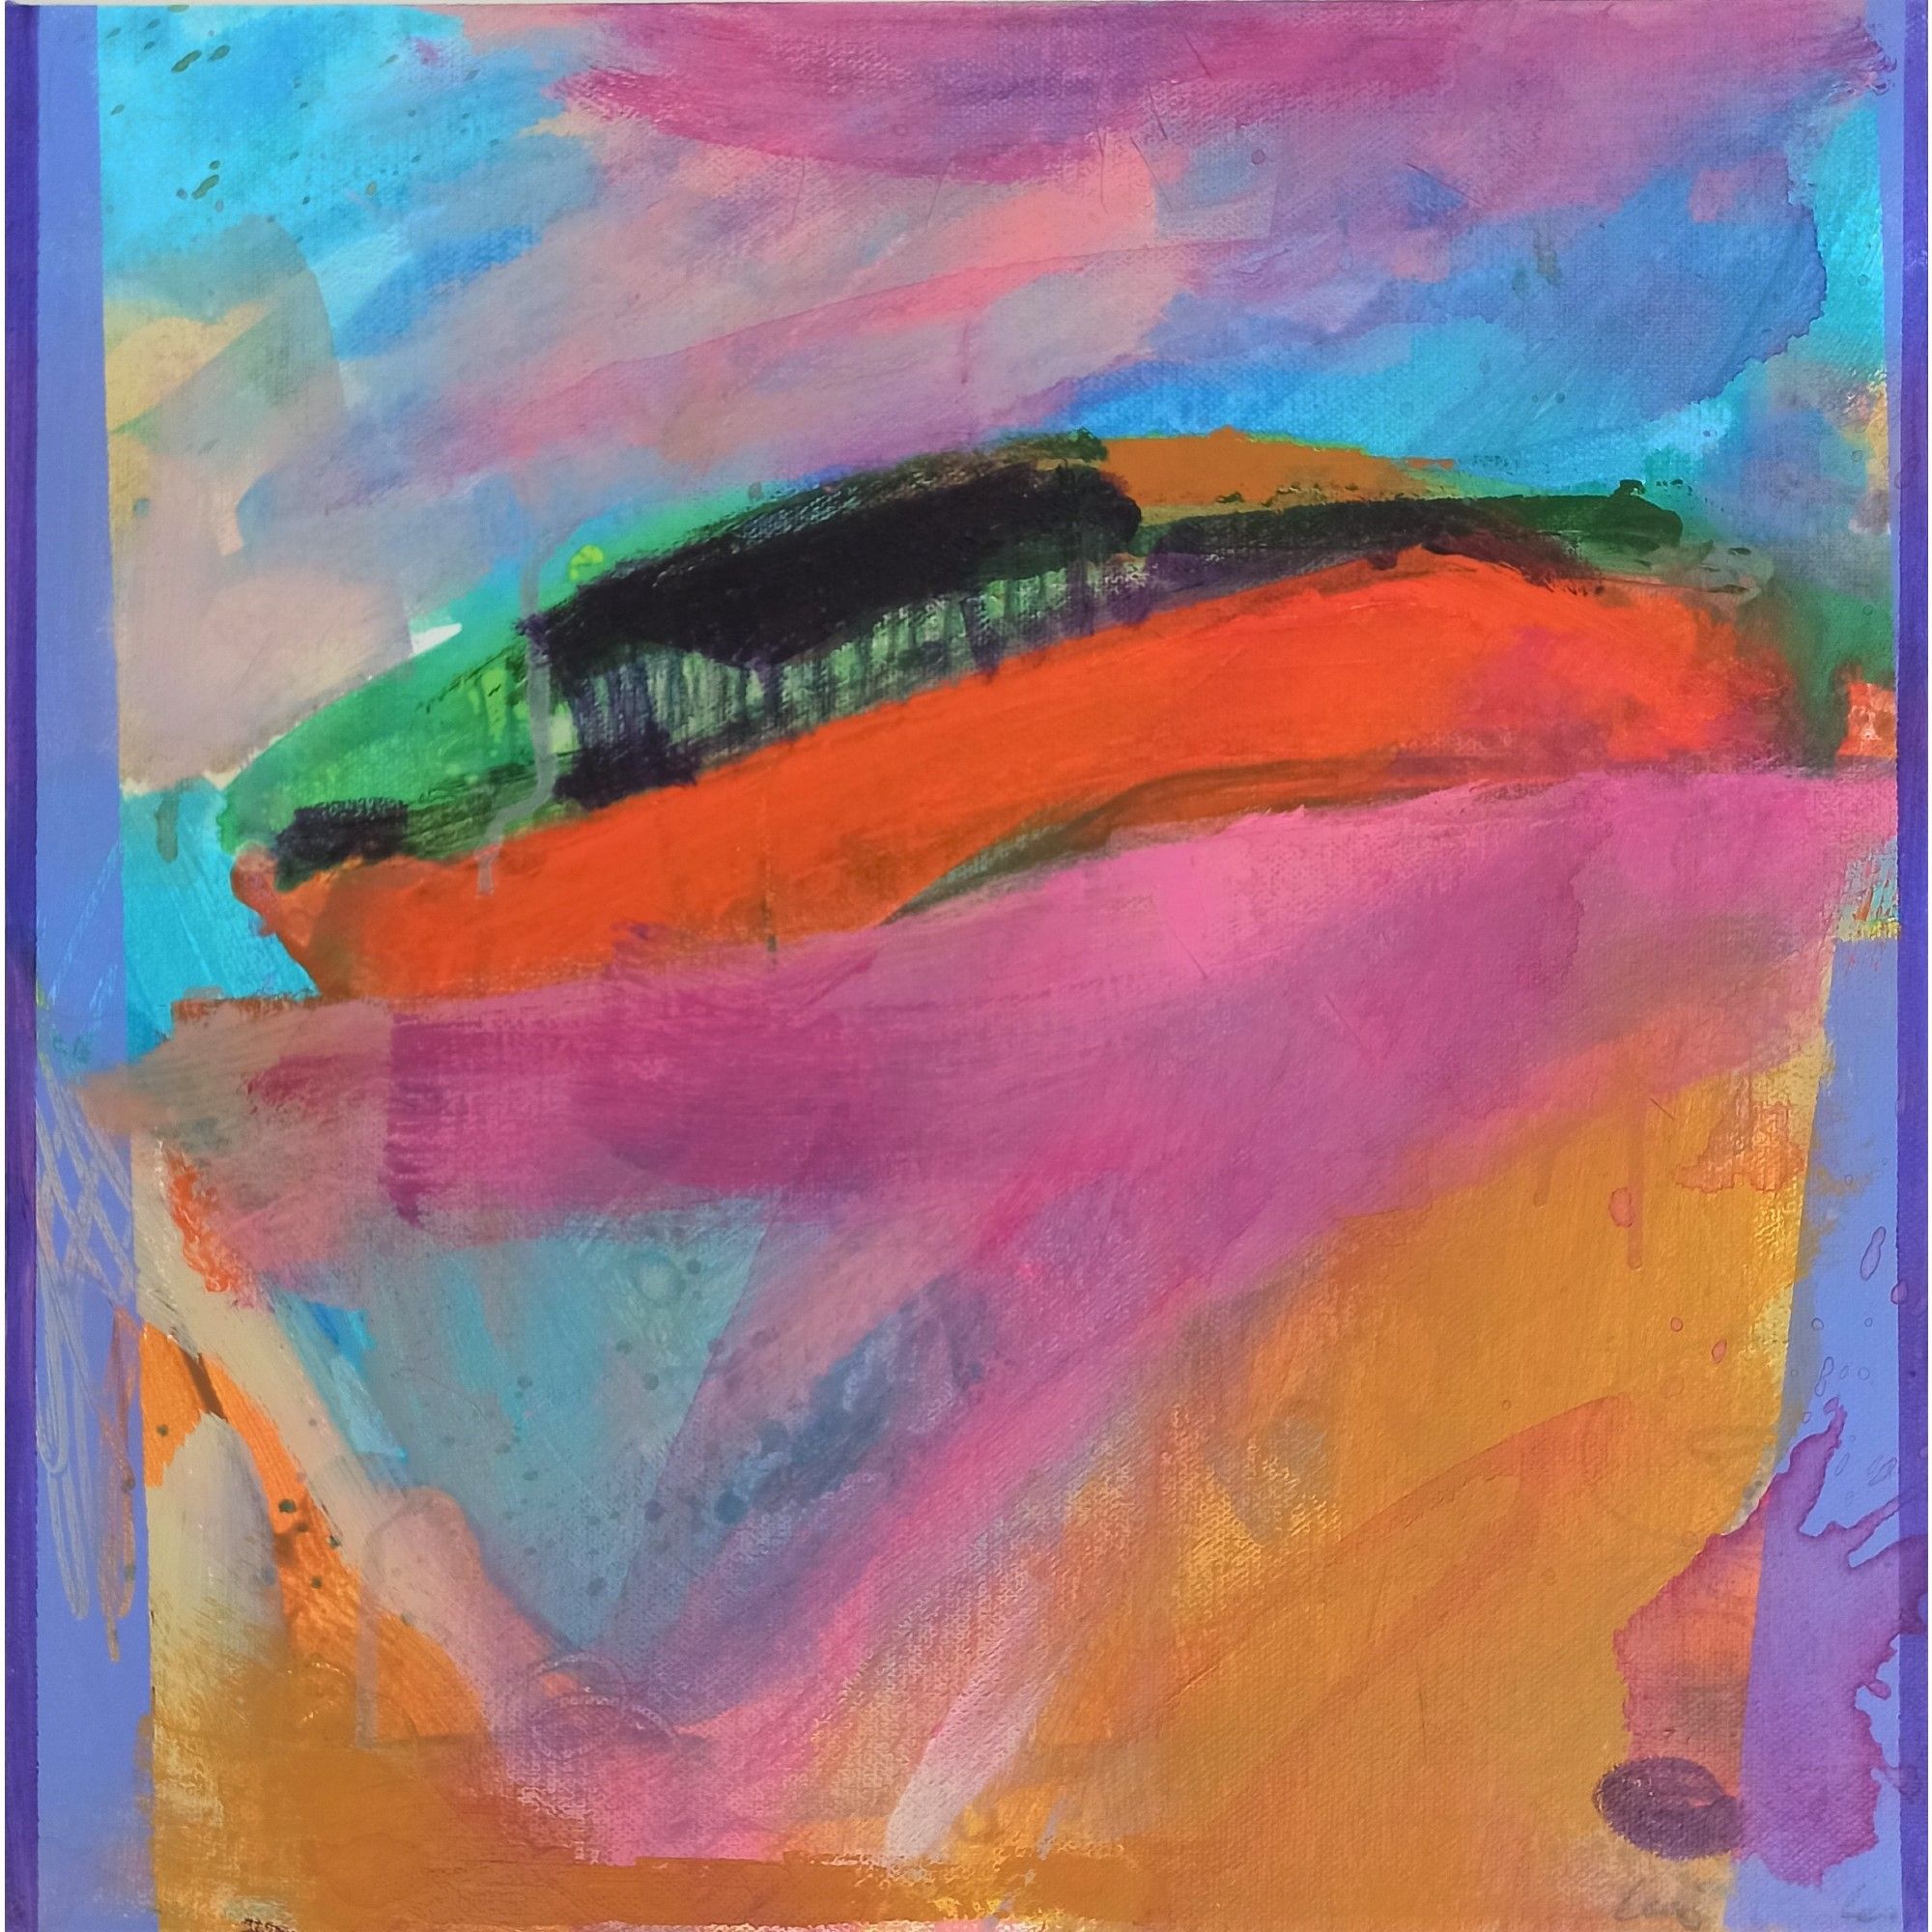 Budleigh Pink and Orange by Liese Webley